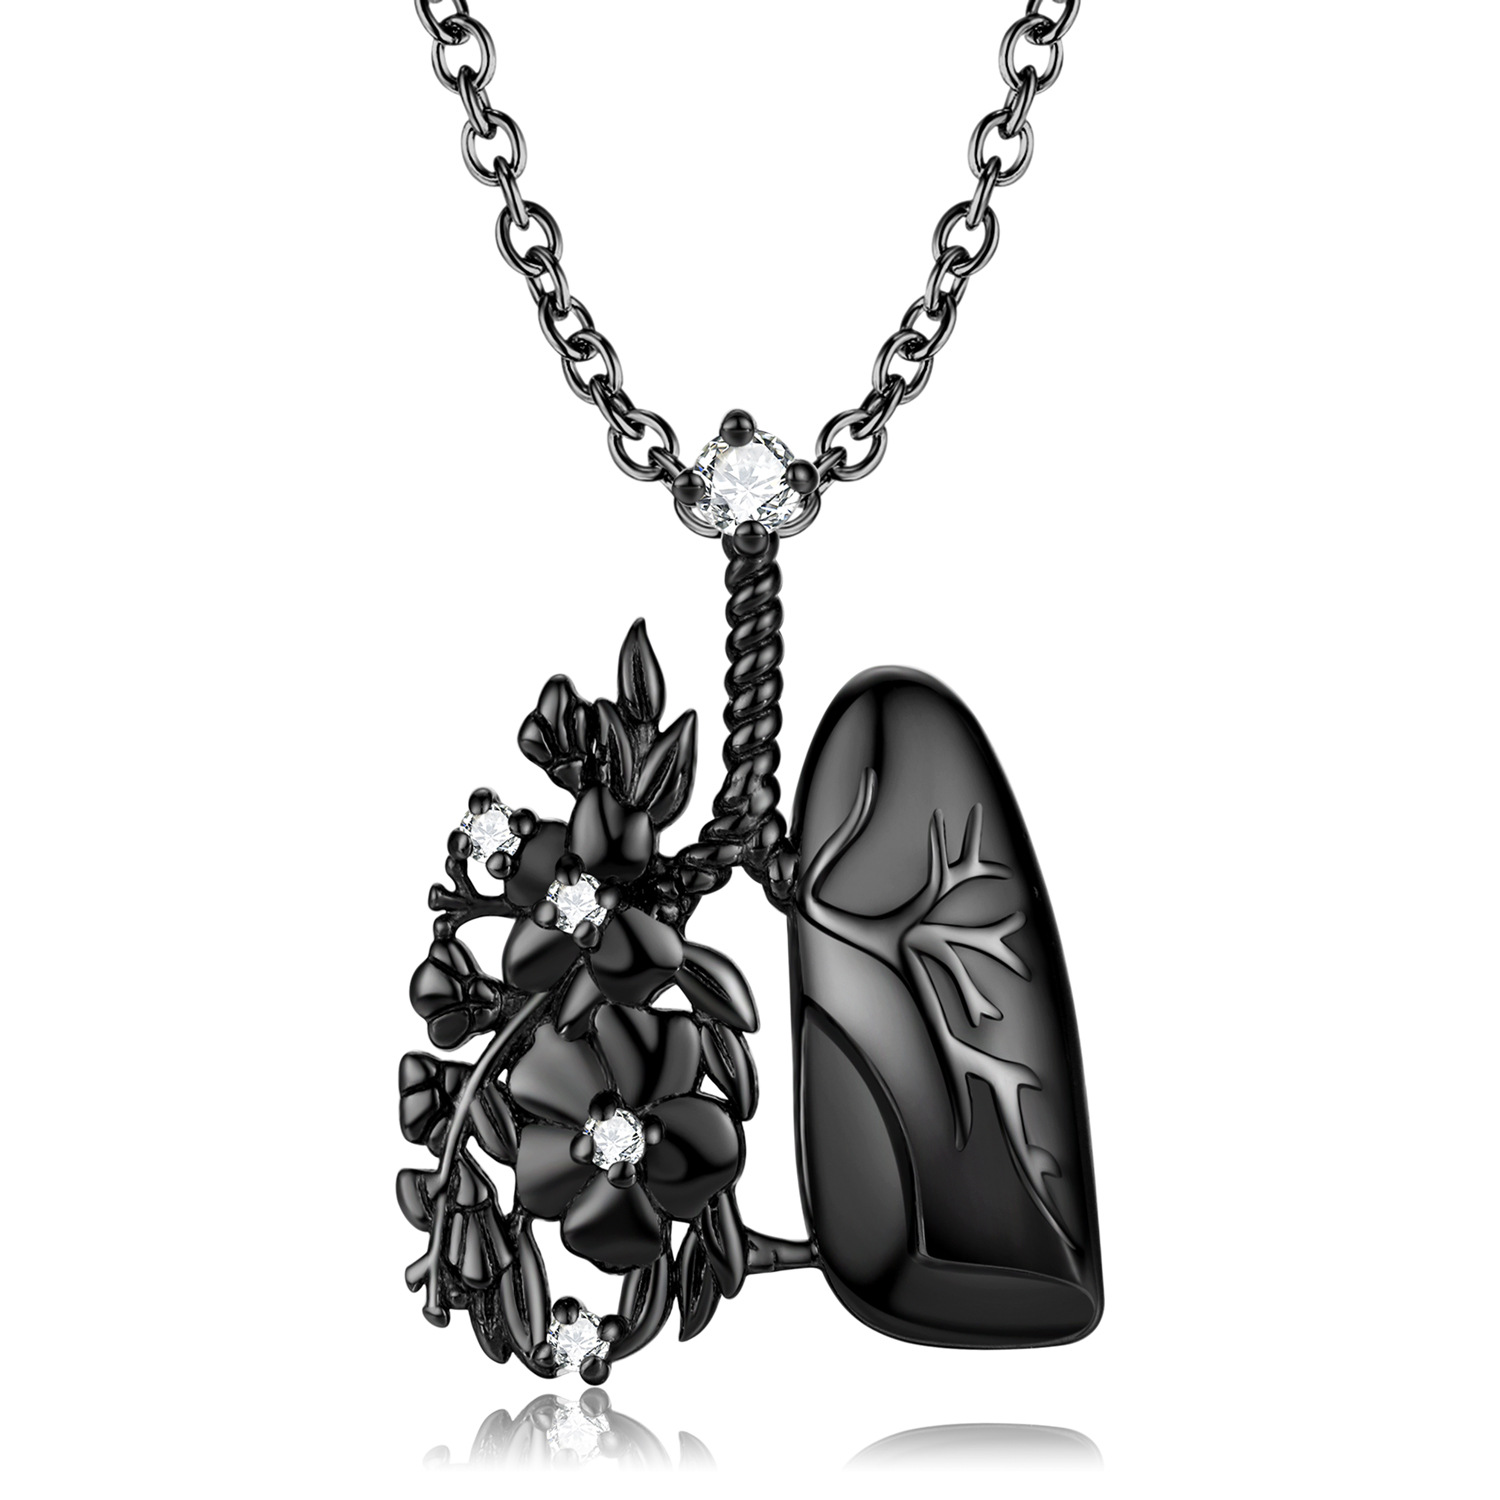 Cz Lung And Flower Design Sterling Silver Necklace